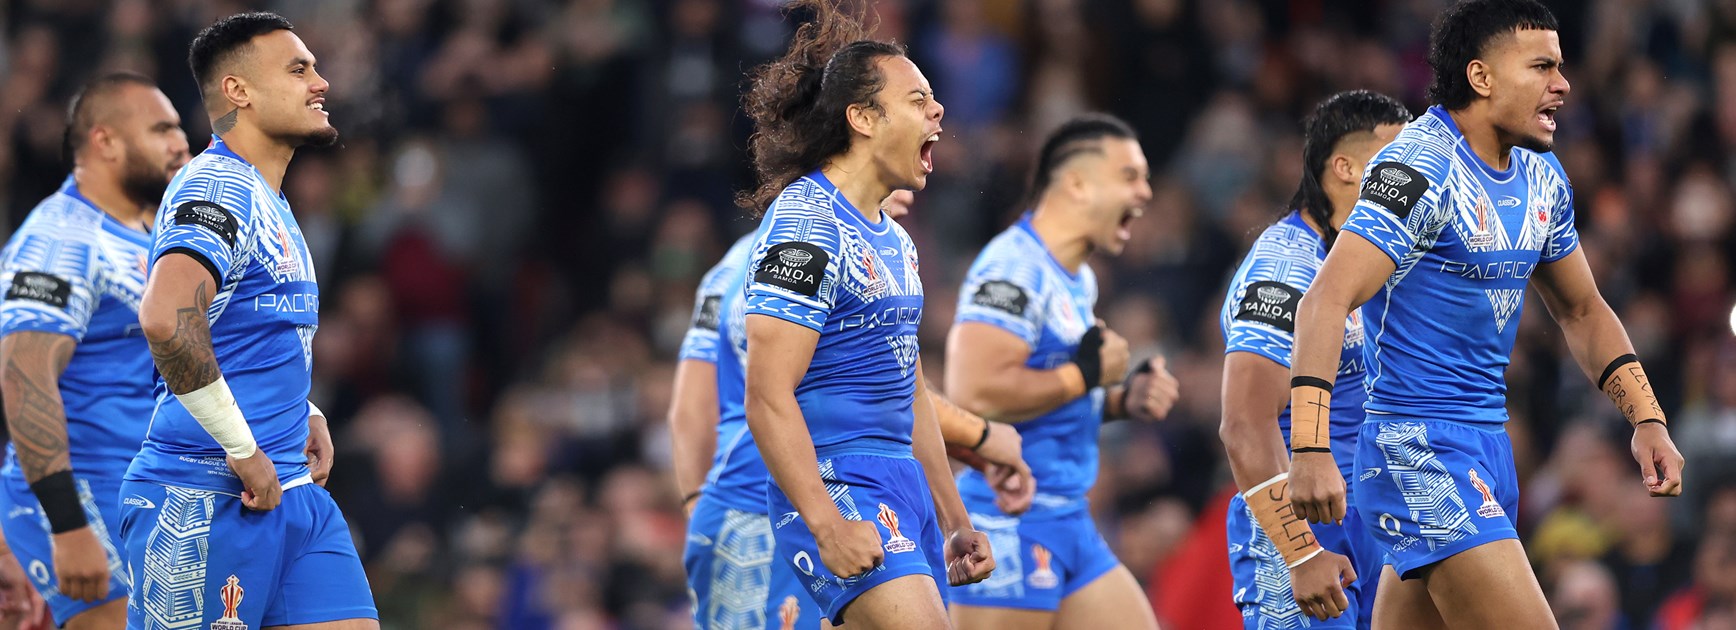 'We have changed the game globally': Samoa stars push for more Tests